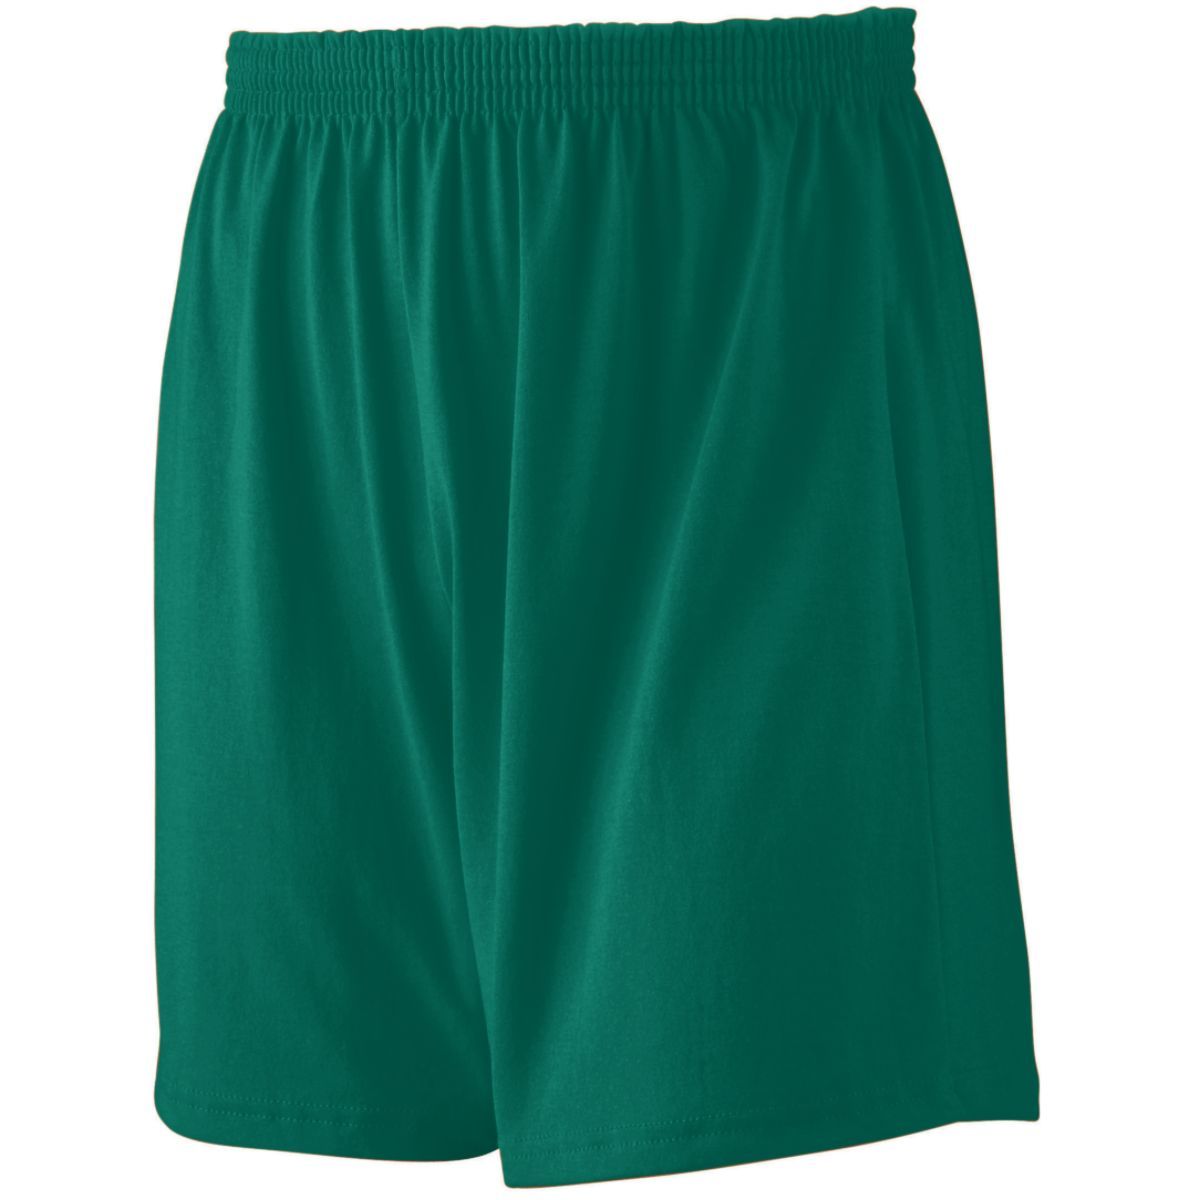 Augusta Sportswear Youth Jersey Knit Shorts in Dark Green  -Part of the Youth, Youth-Shorts, Augusta-Products product lines at KanaleyCreations.com